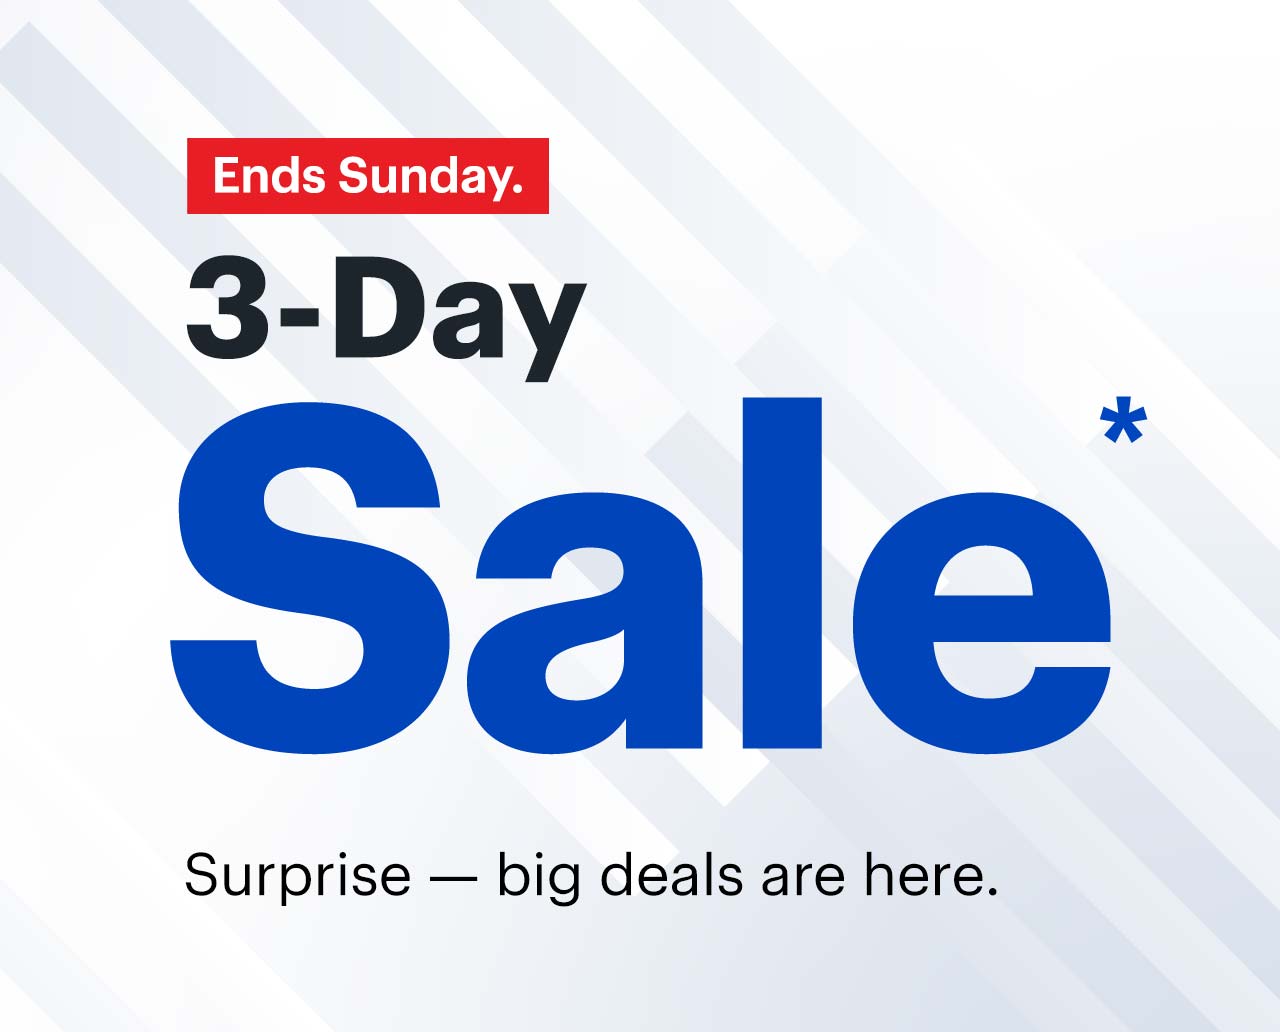 3-Day Sale. Surprise — big deals are here. Ends Sunday. Reference disclaimer.